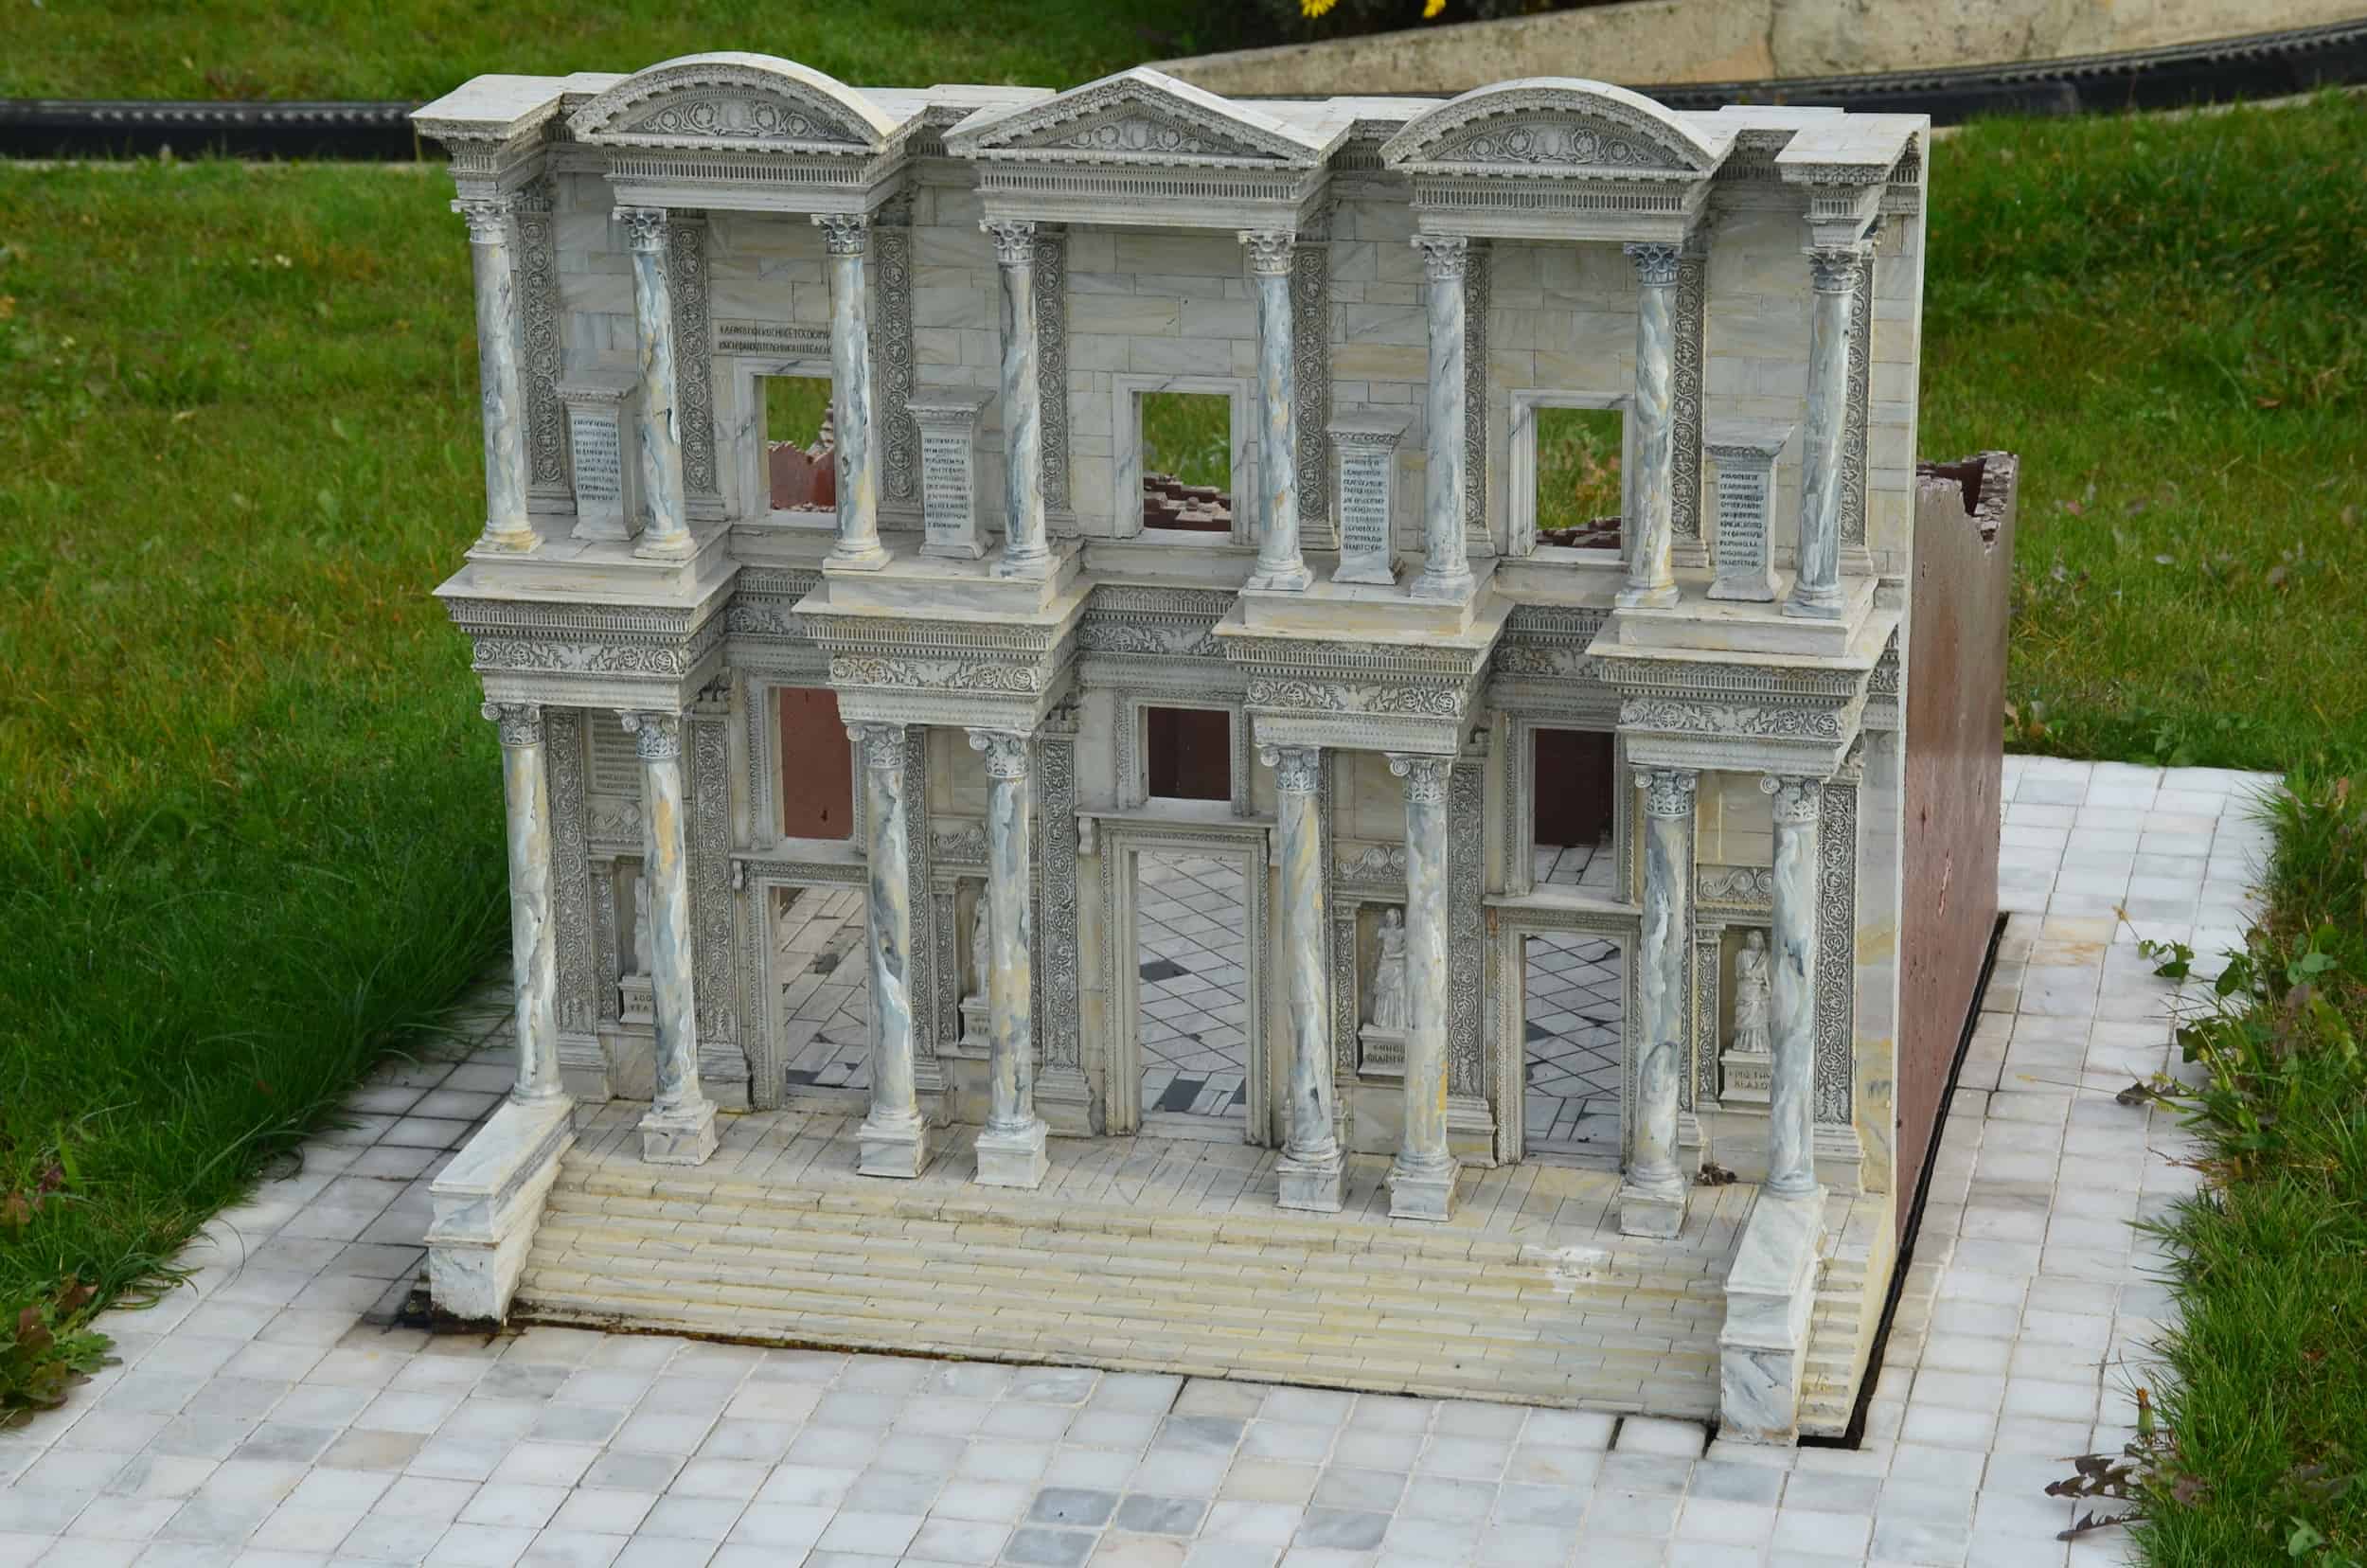 Model of the Library of Celsus, Ephesus, 2nd century